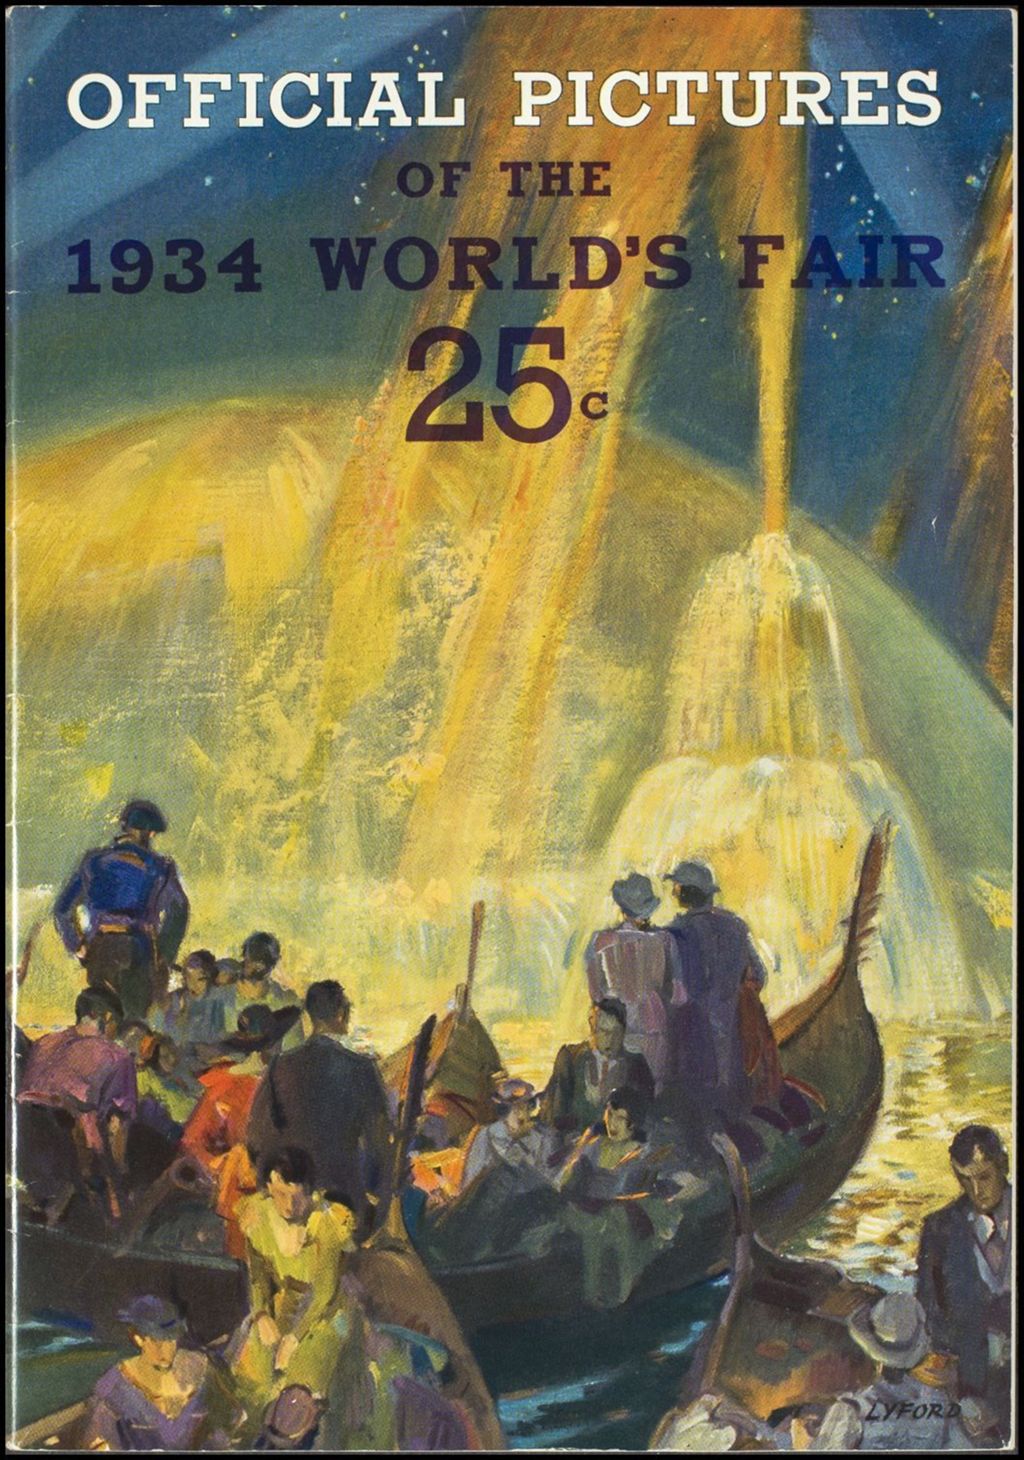 Miniature of The official pictures of the 1934 world's fair (Folder 16-201)